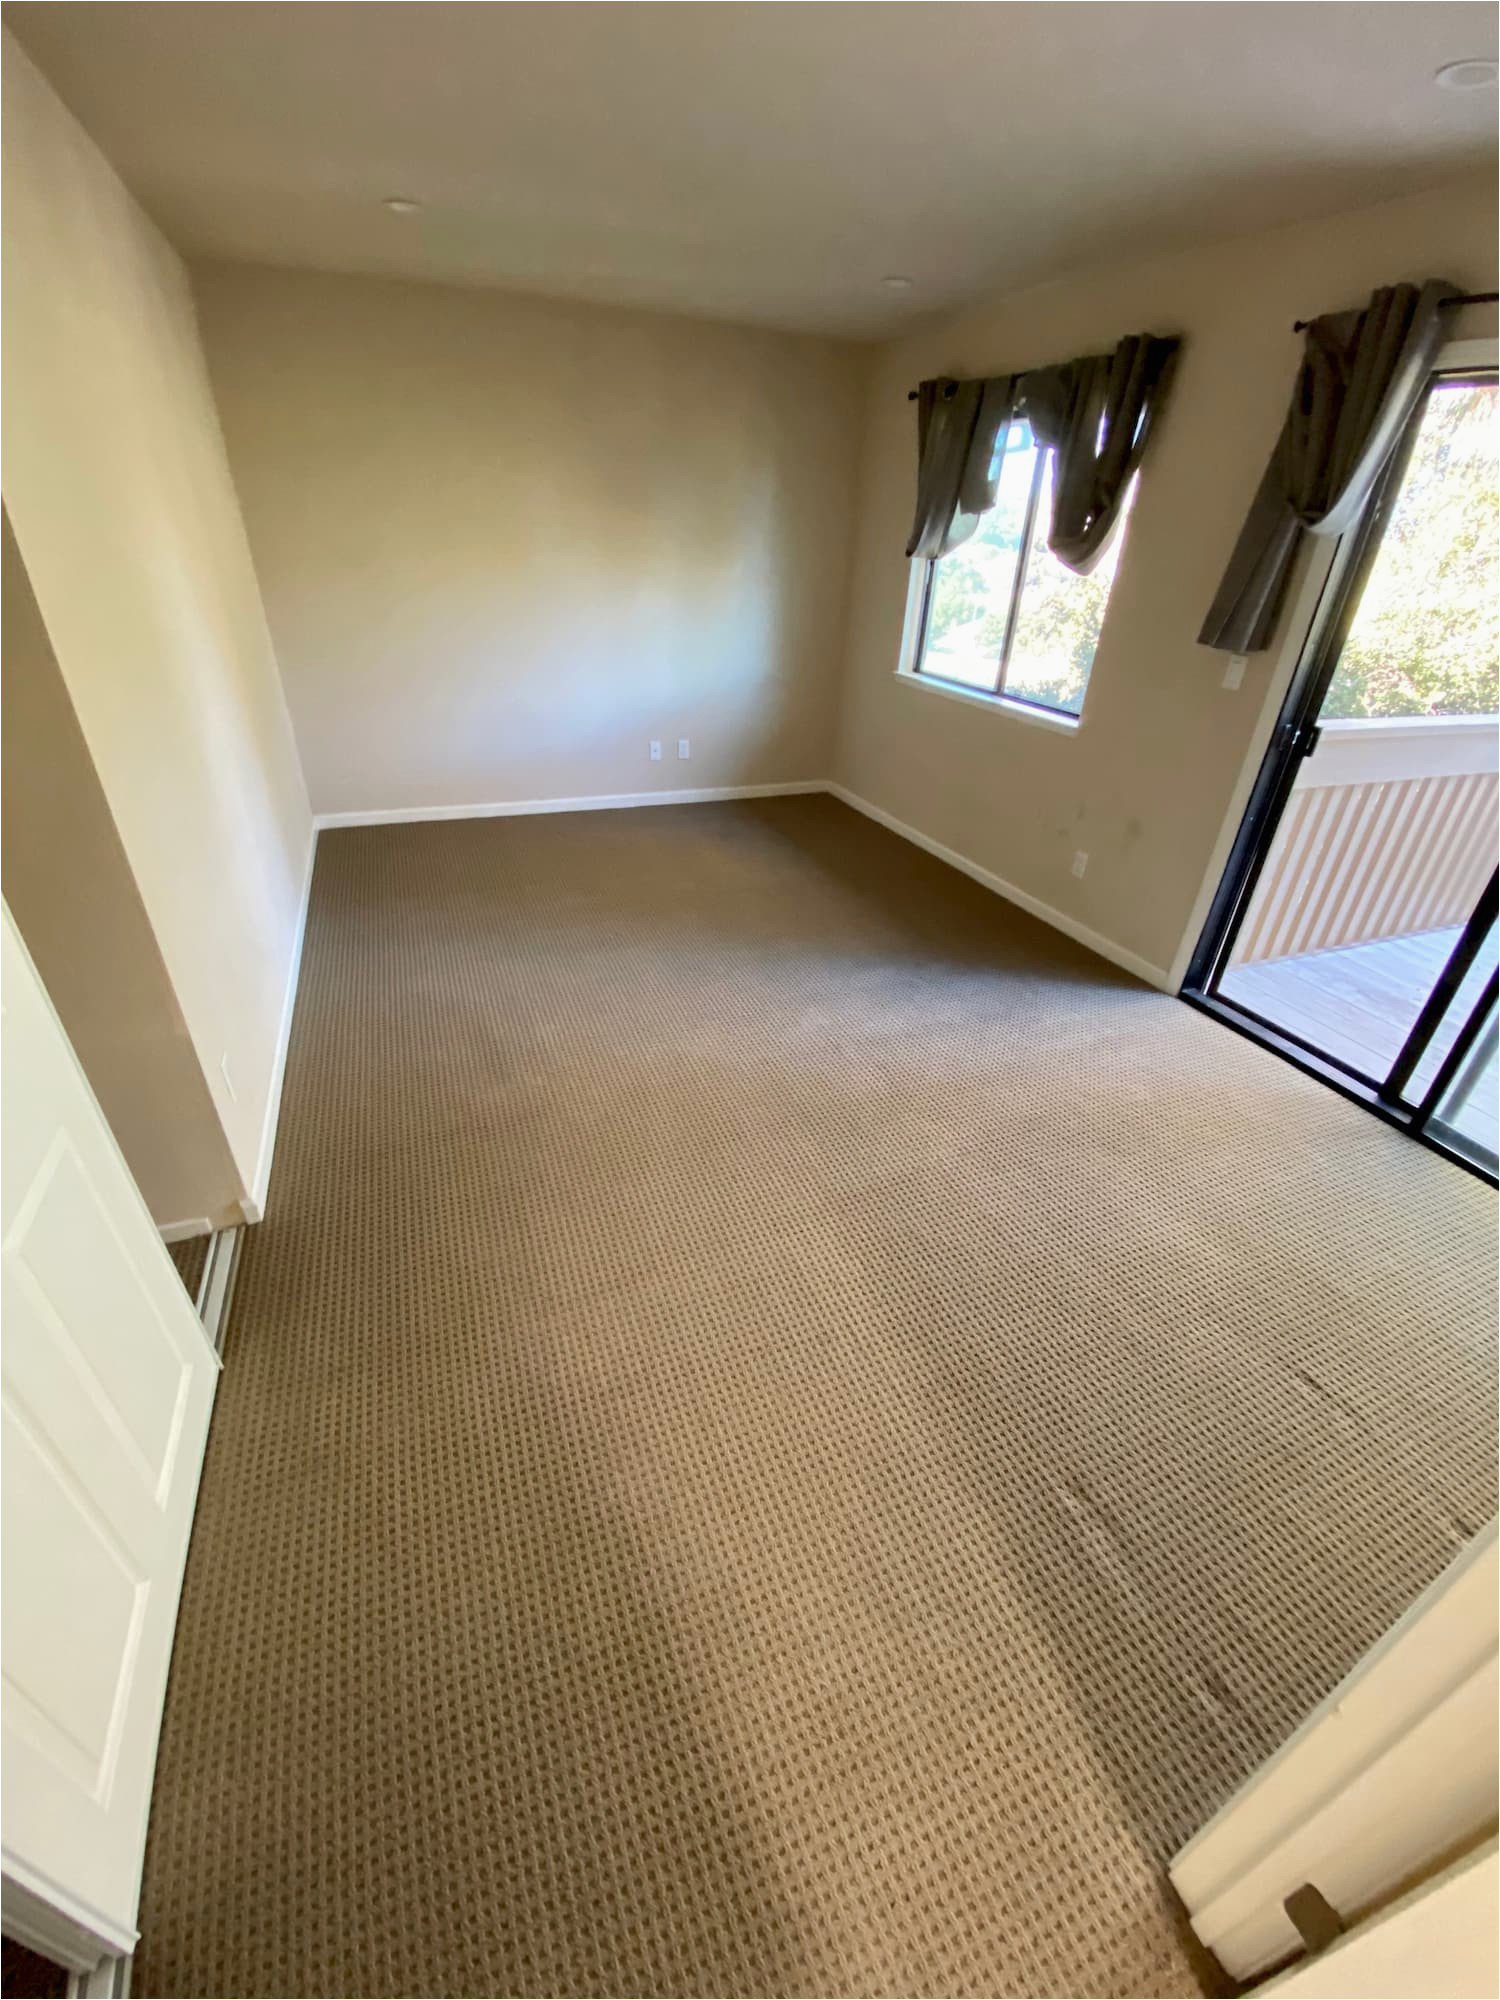 Area Rug Cleaning San Mateo Residential Carpet Cleaning On Deanza Blvd In San Mateo, Ca by …